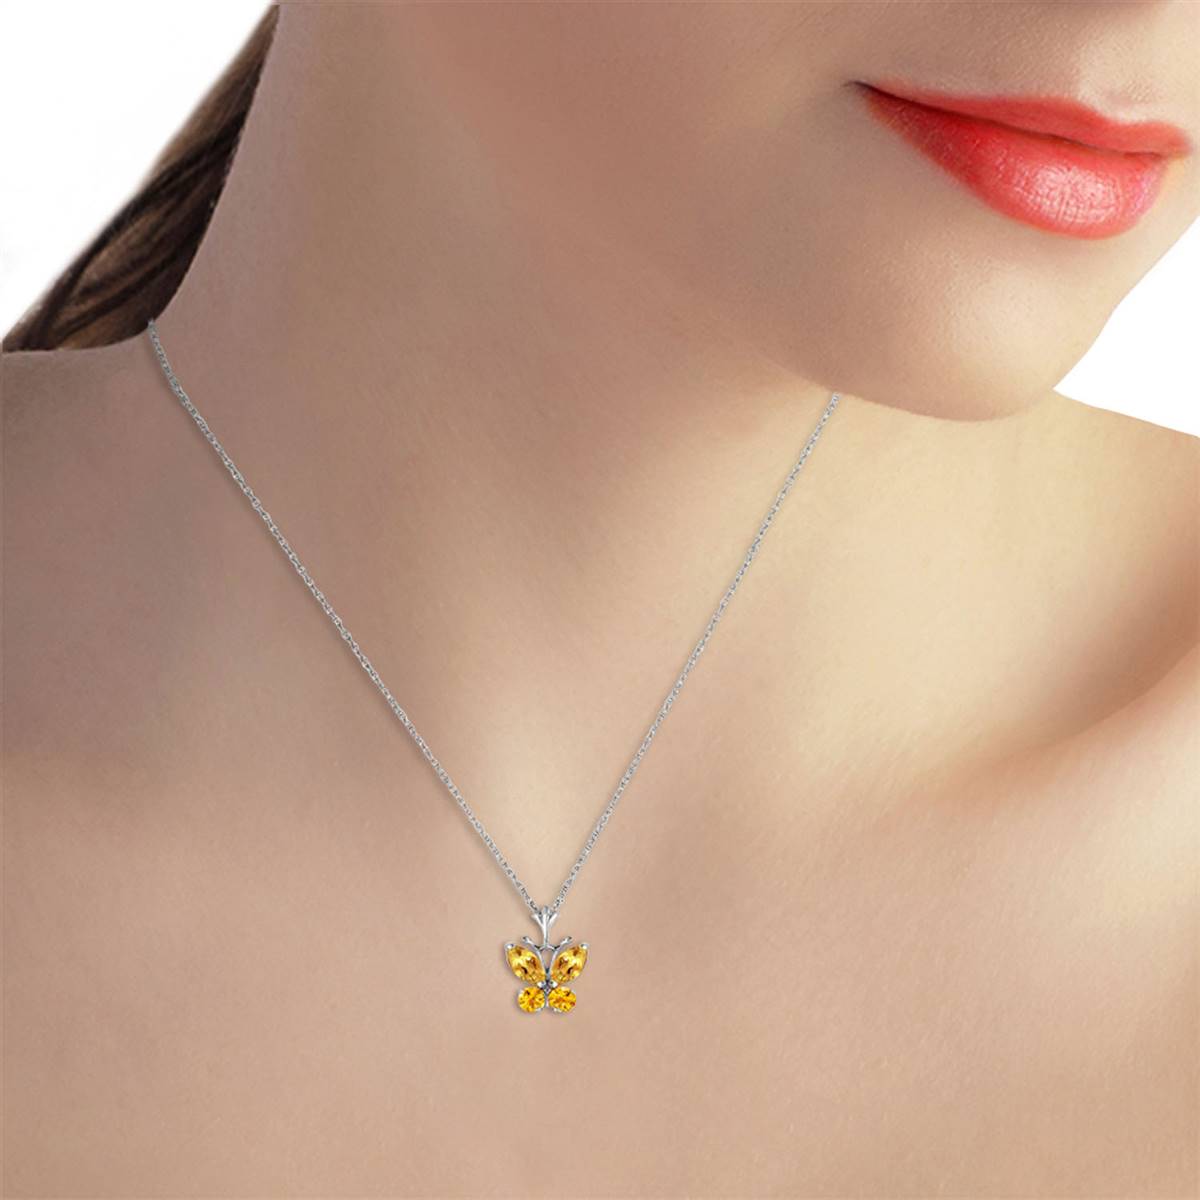 0.6 Carat 14K Solid White Gold Butterfly Necklace Citrine